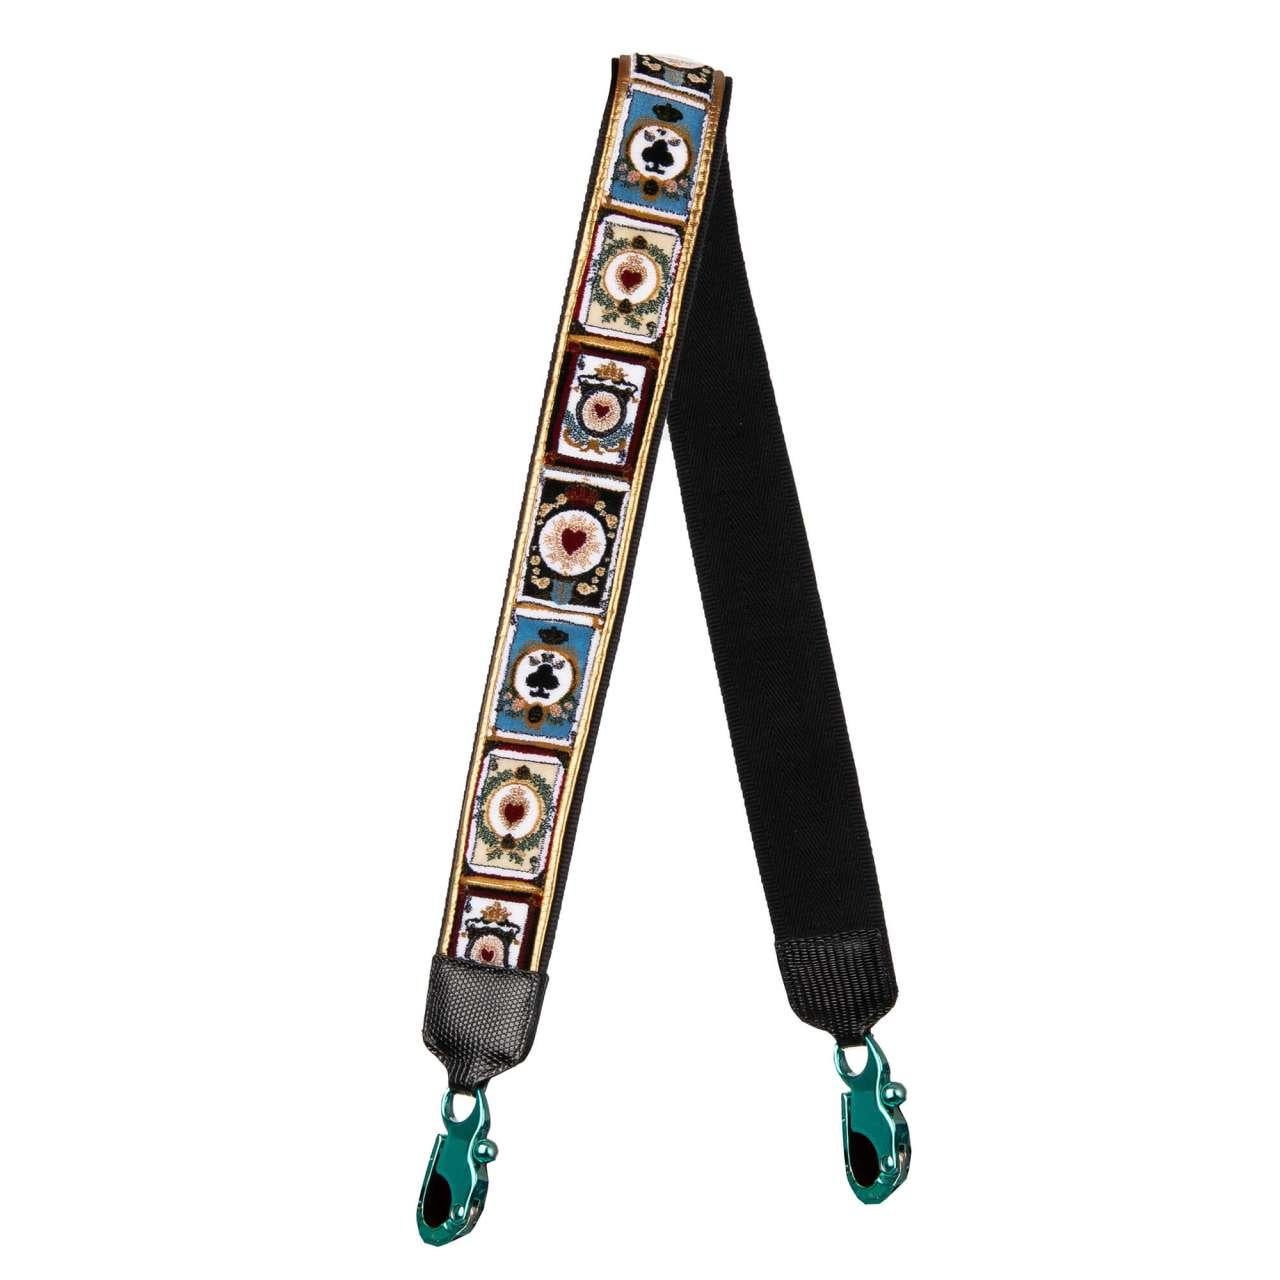 - Velvet bag Strap / Handle with playing cards print and leather applications in blackk and blue by DOLCE & GABBANA - New with Tag - MADE IN ITALY - Model: BI1117-AU275-8B015 - Material: 70% Cotton, 15 Calfskin, 10% Viscose, 5% Polyester - Color: